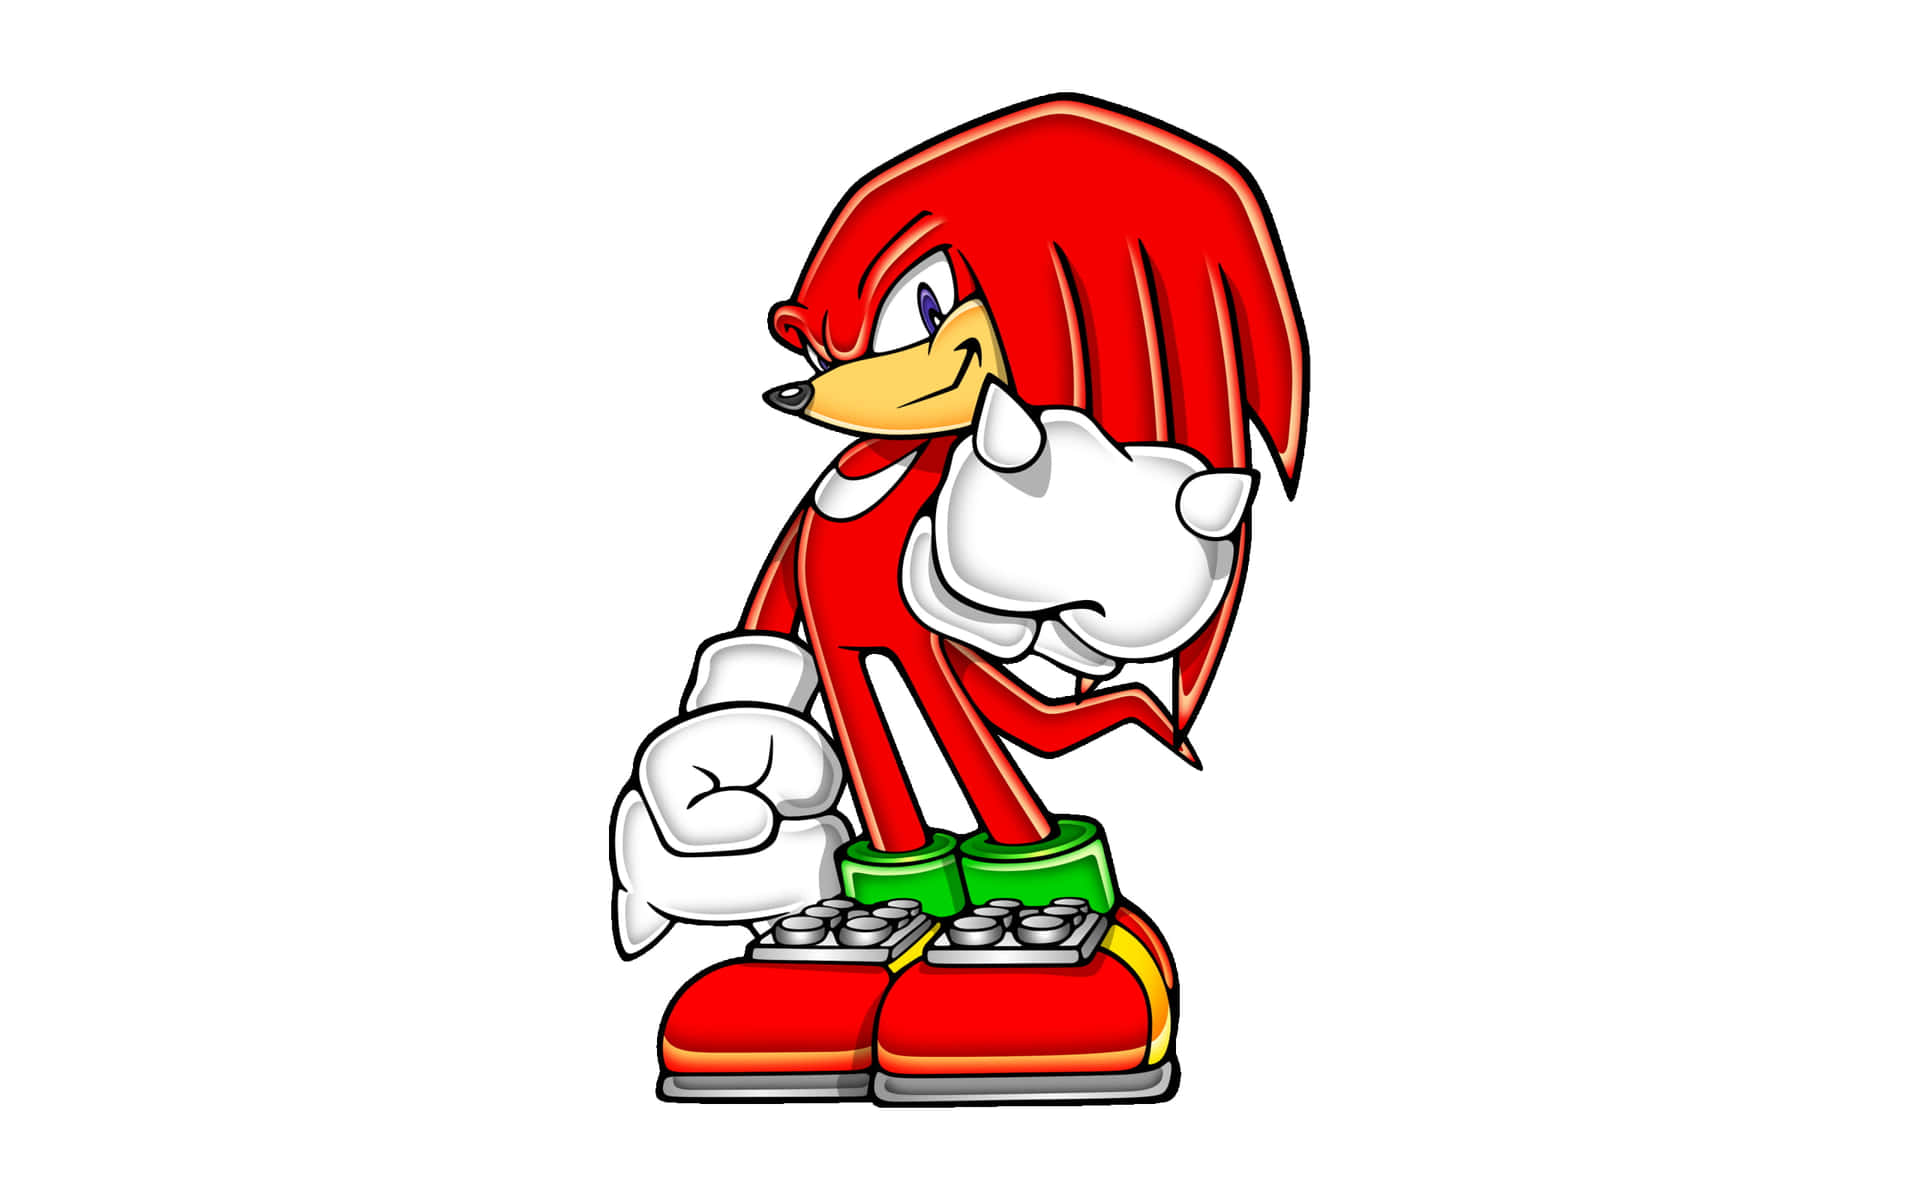 Check Out Knuckles, The Cheeky Echidna With Attitude! Background